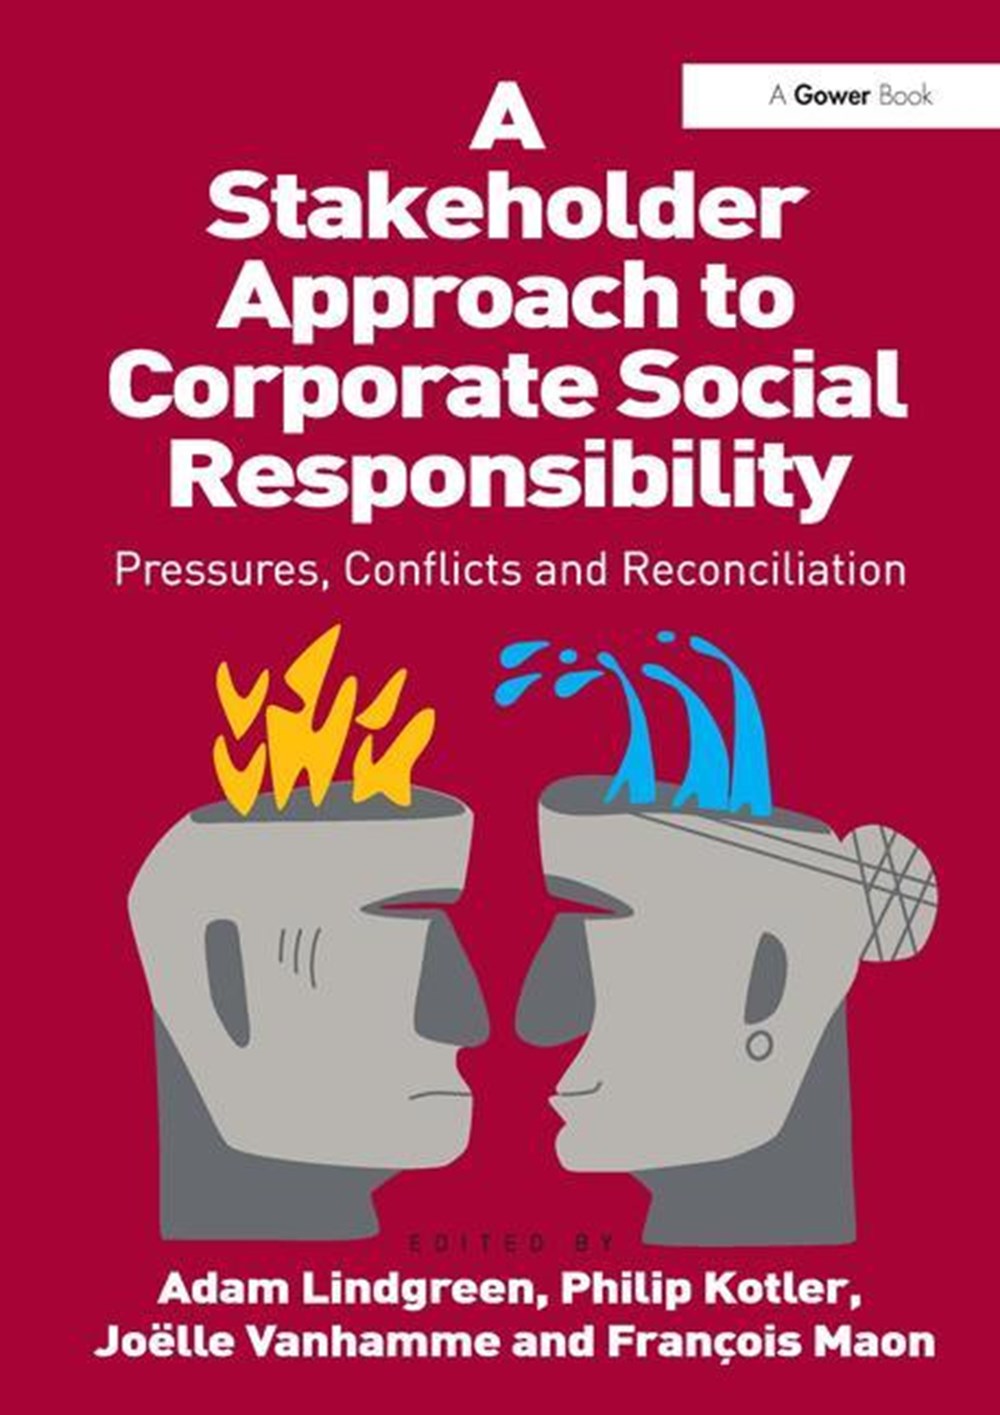 Stakeholder Approach to Corporate Social Responsibility: Pressures, Conflicts, and Reconciliation